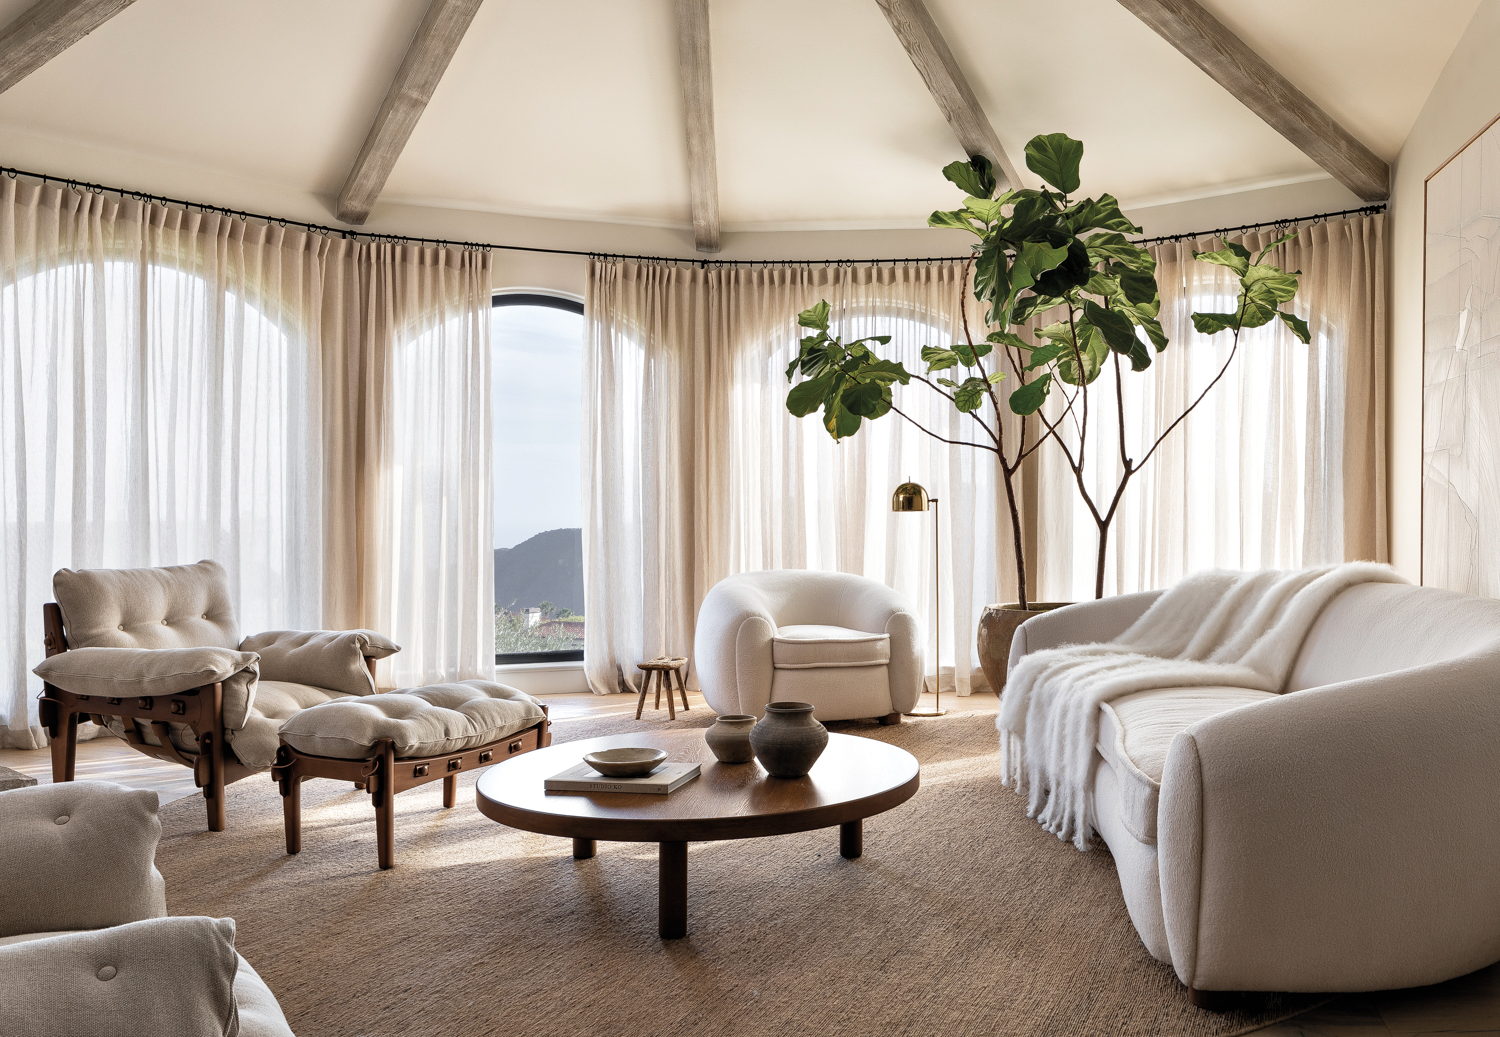 round, curved living room with white furniture and curtains